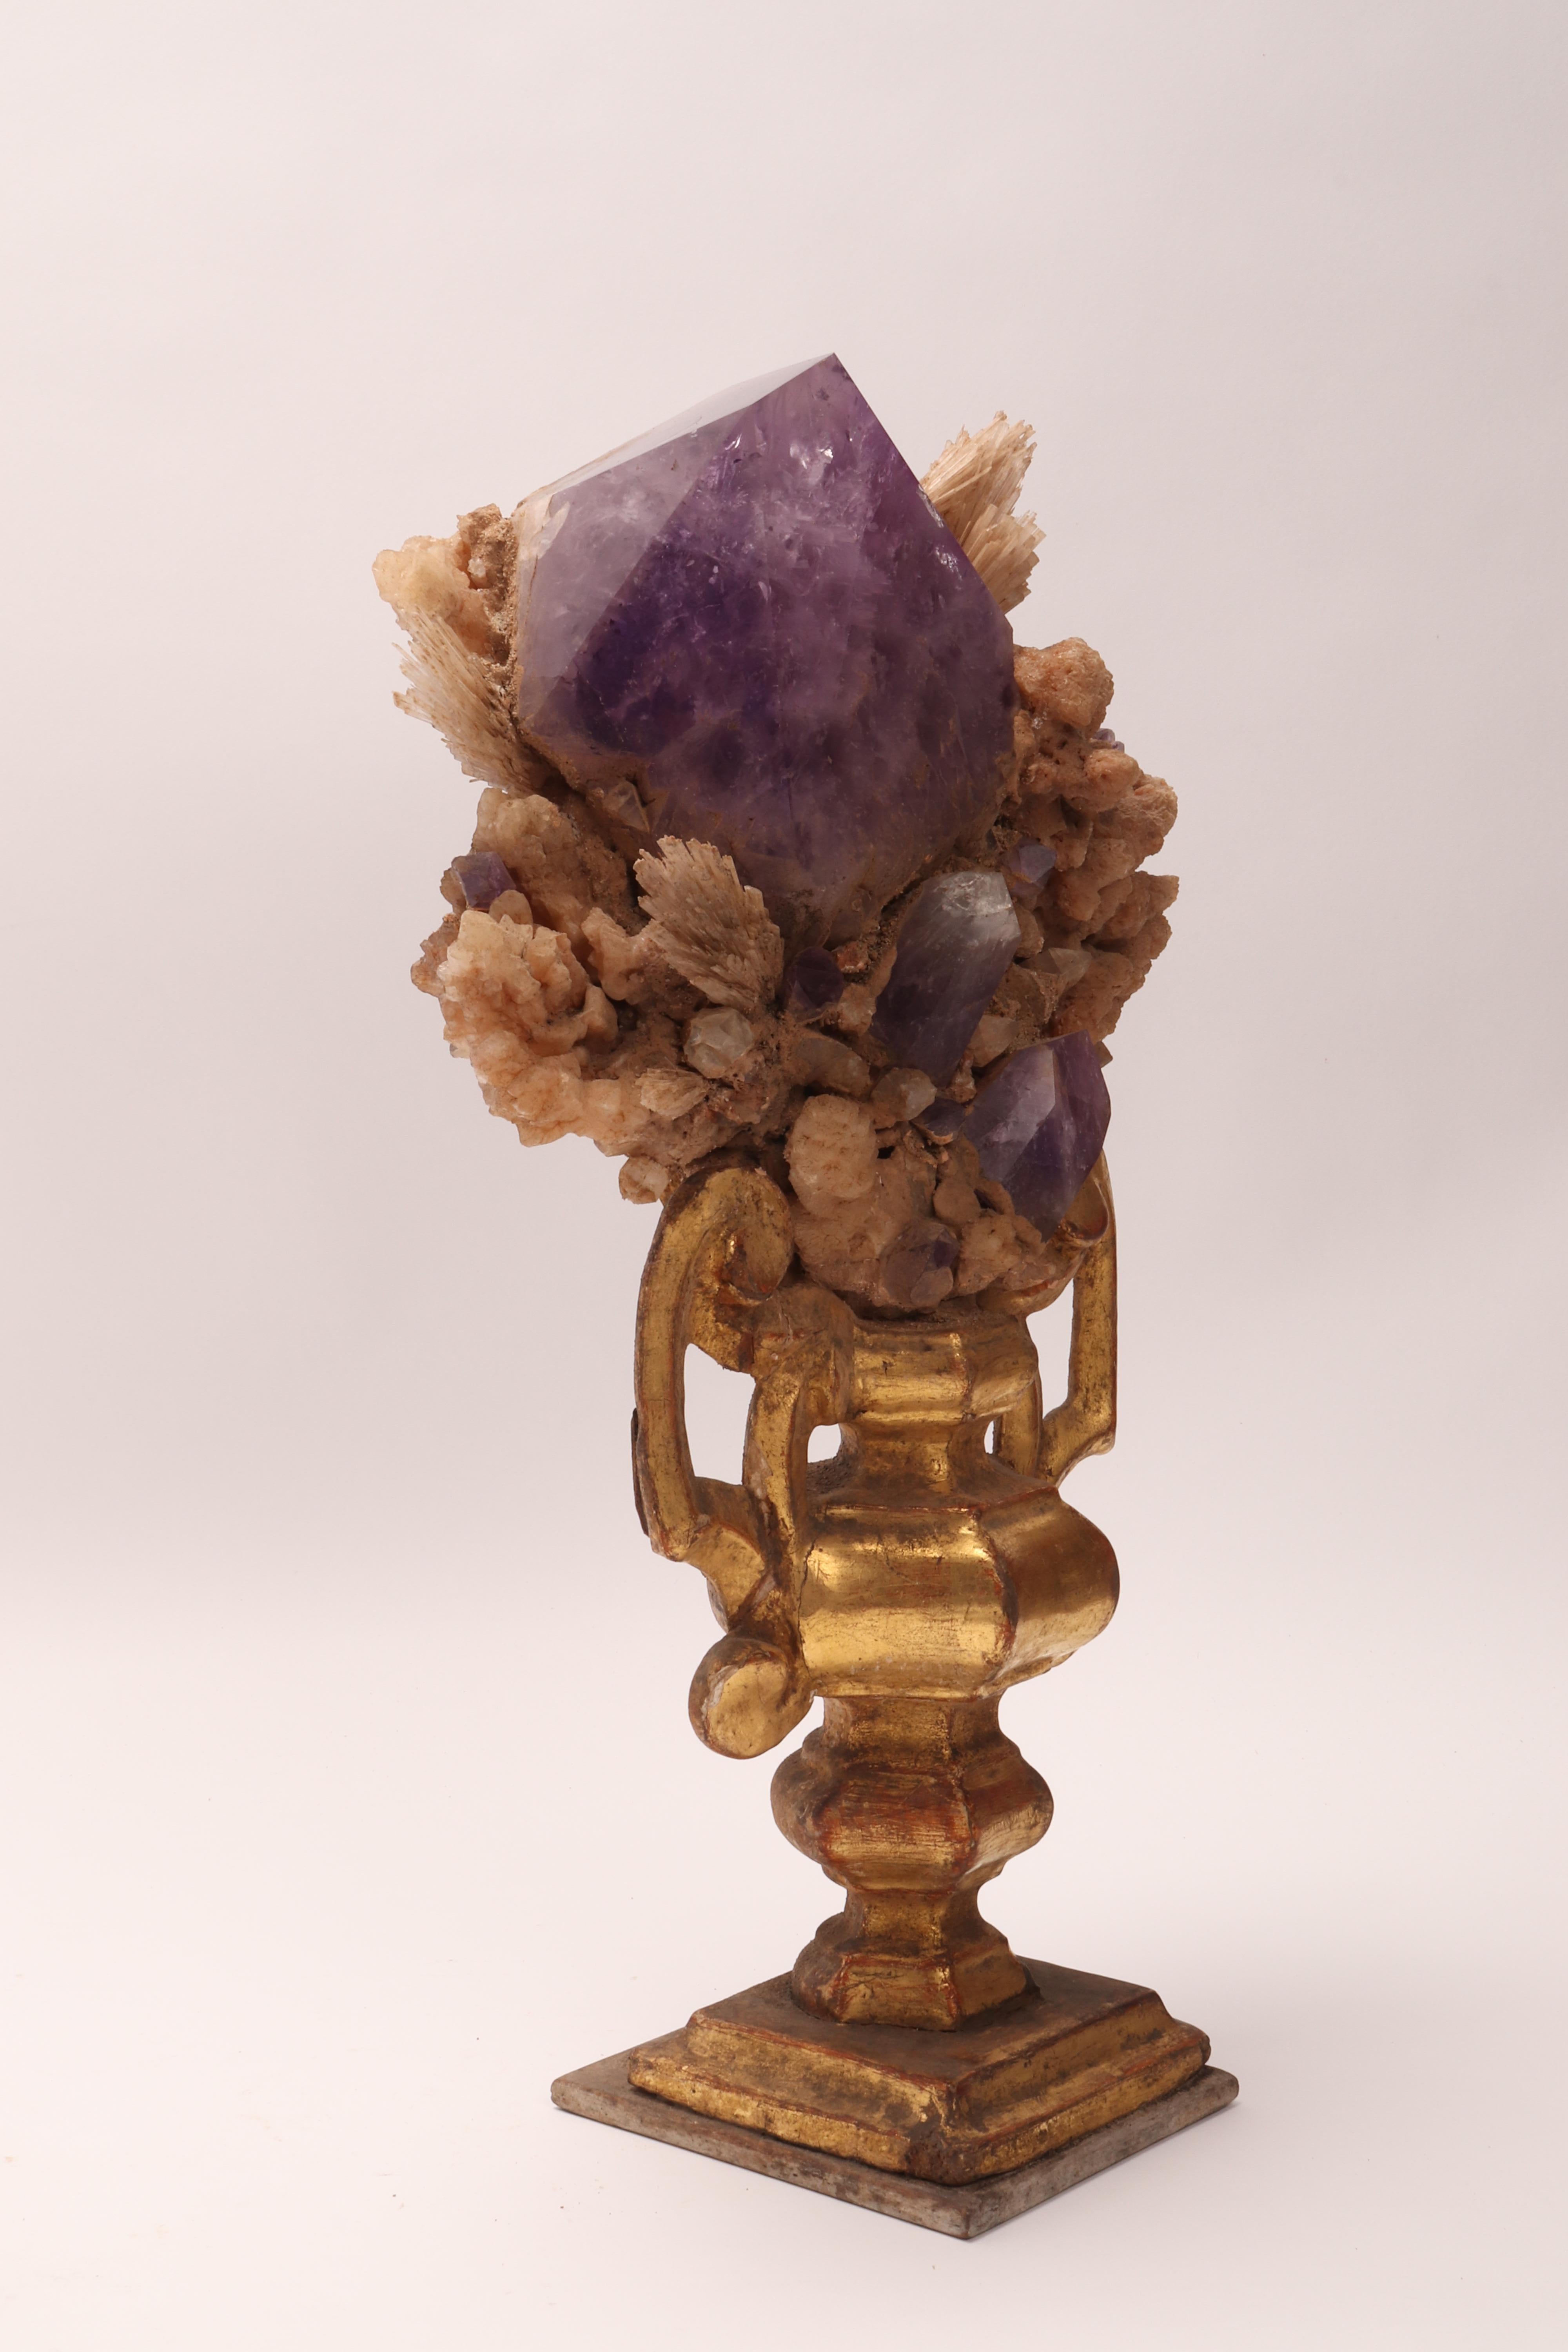 Amethyst Natural Specimen Amethiste and Calcite Flowers Crystals, Italy, 1880